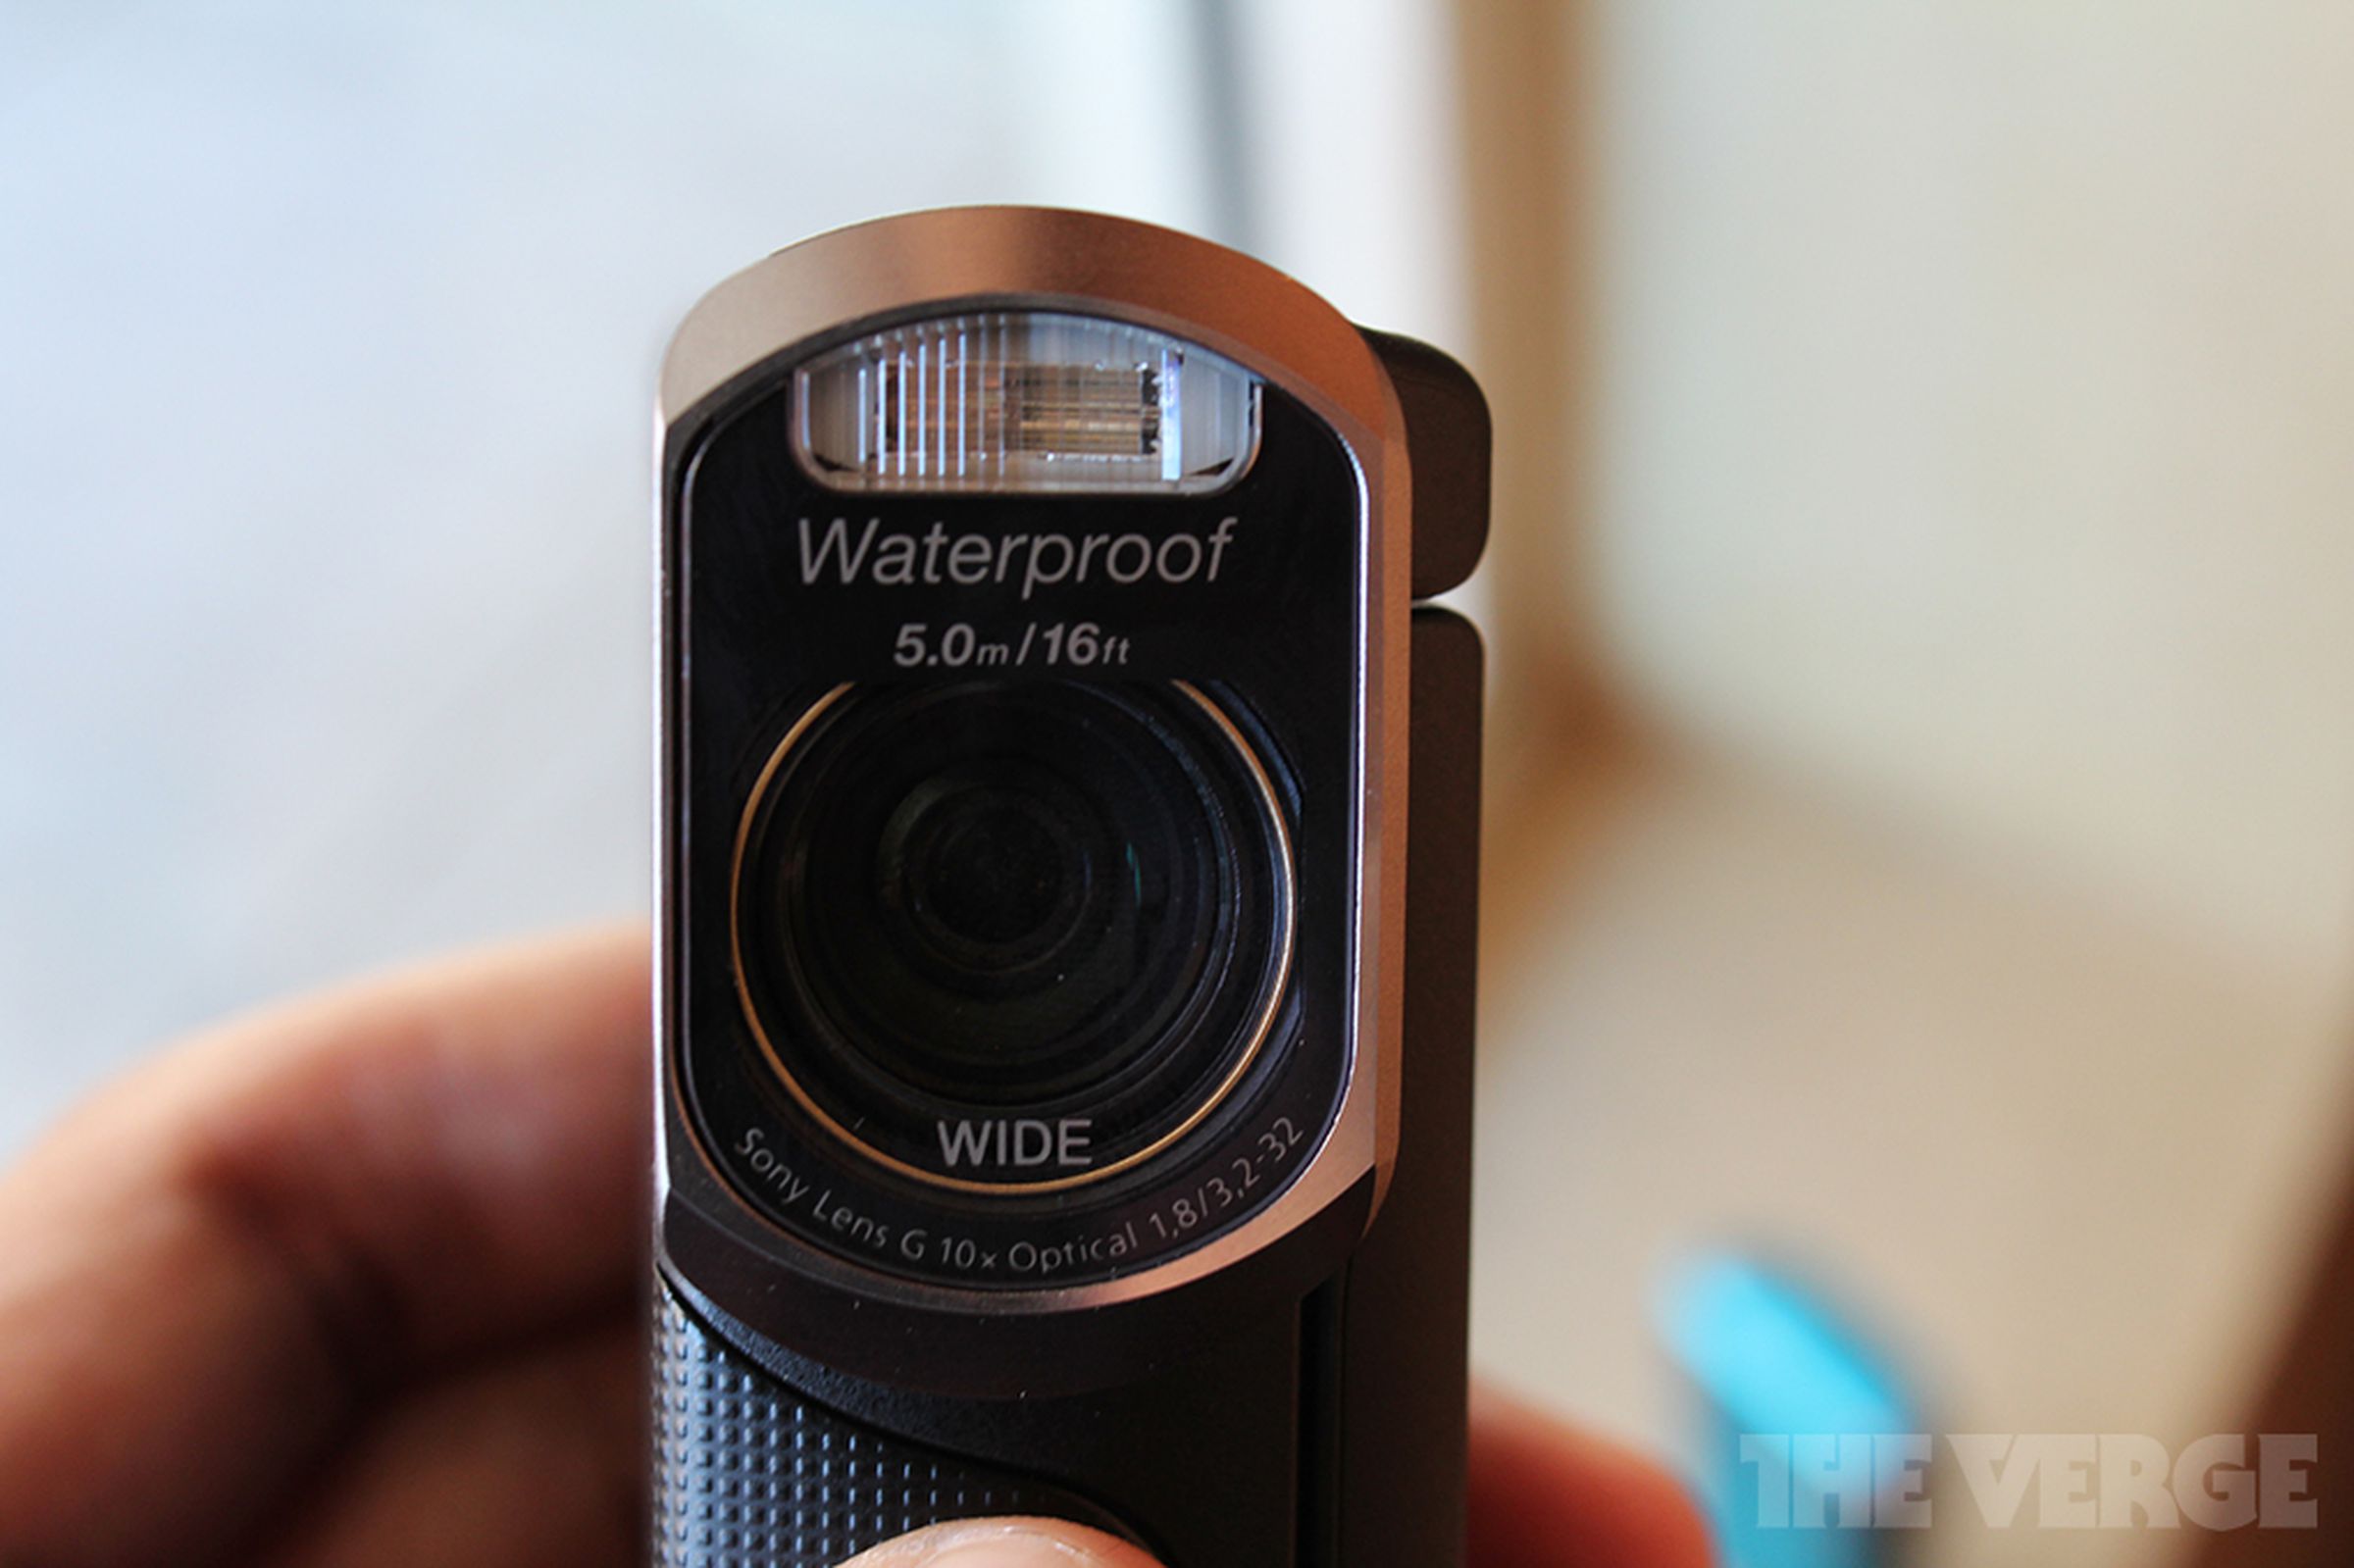 Sony Handycam HDR-GW77V hands on pictures